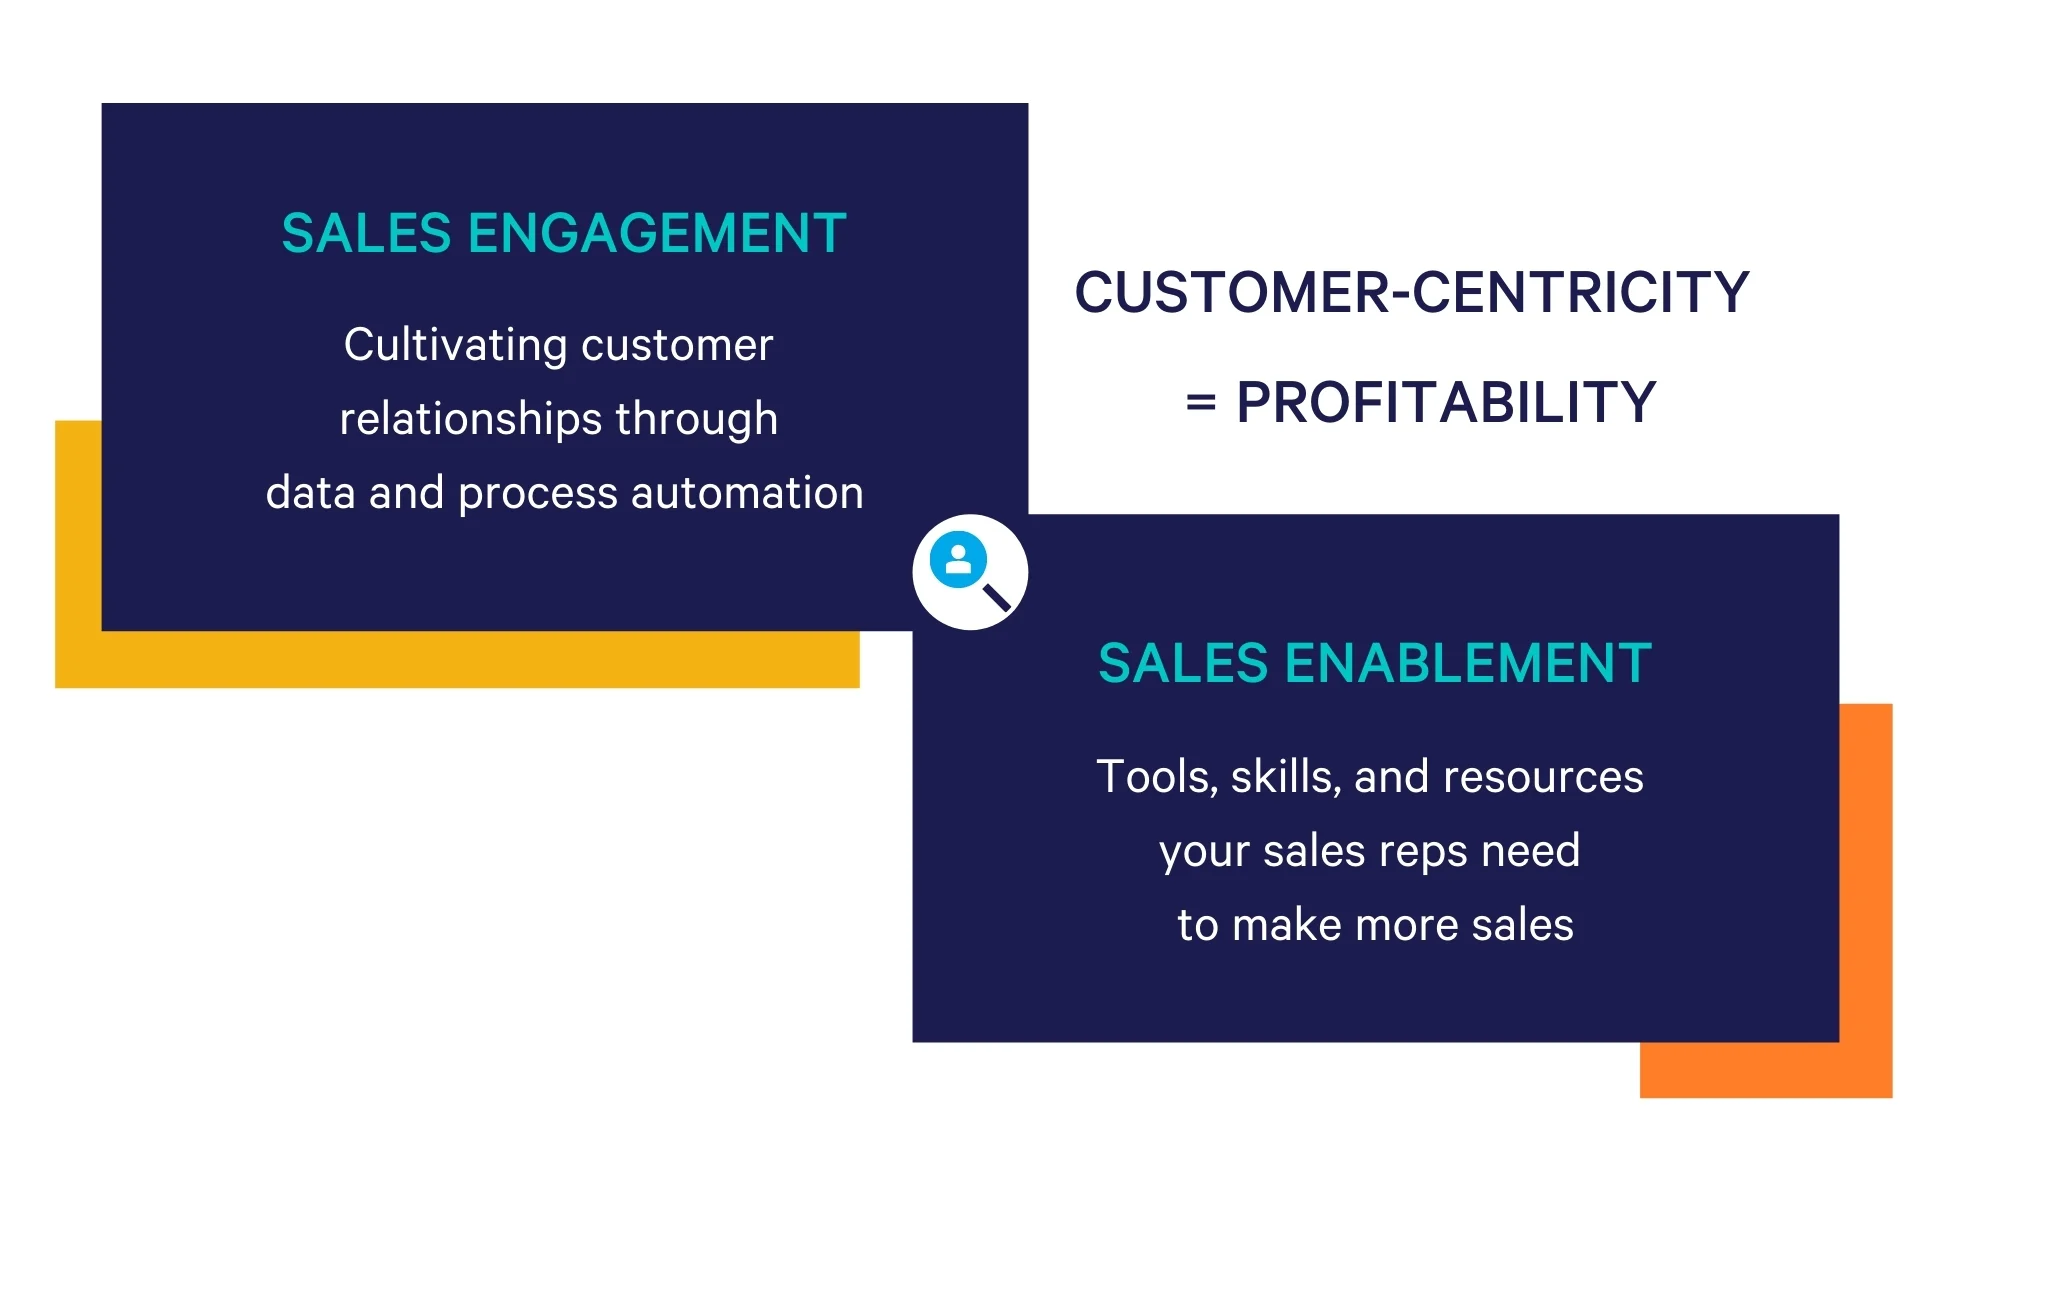 Graphic showing the intersection of sales enablement and sales engagement and how customer-centricity benefits profitability 